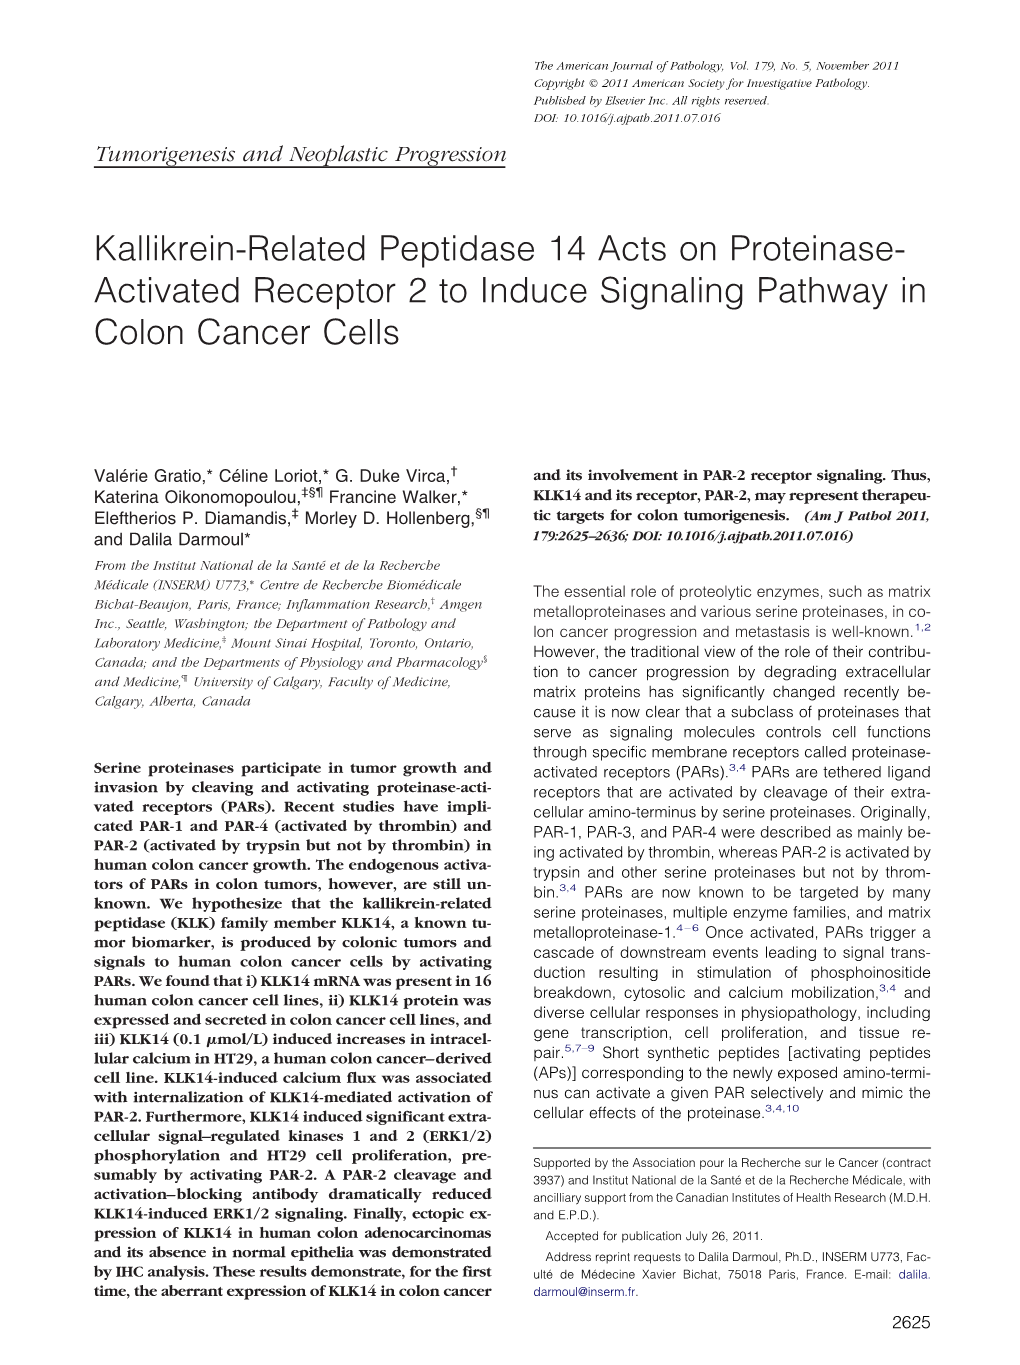 Kallikrein-Related Peptidase 14 Acts on Proteinase- Activated Receptor 2 to Induce Signaling Pathway in Colon Cancer Cells